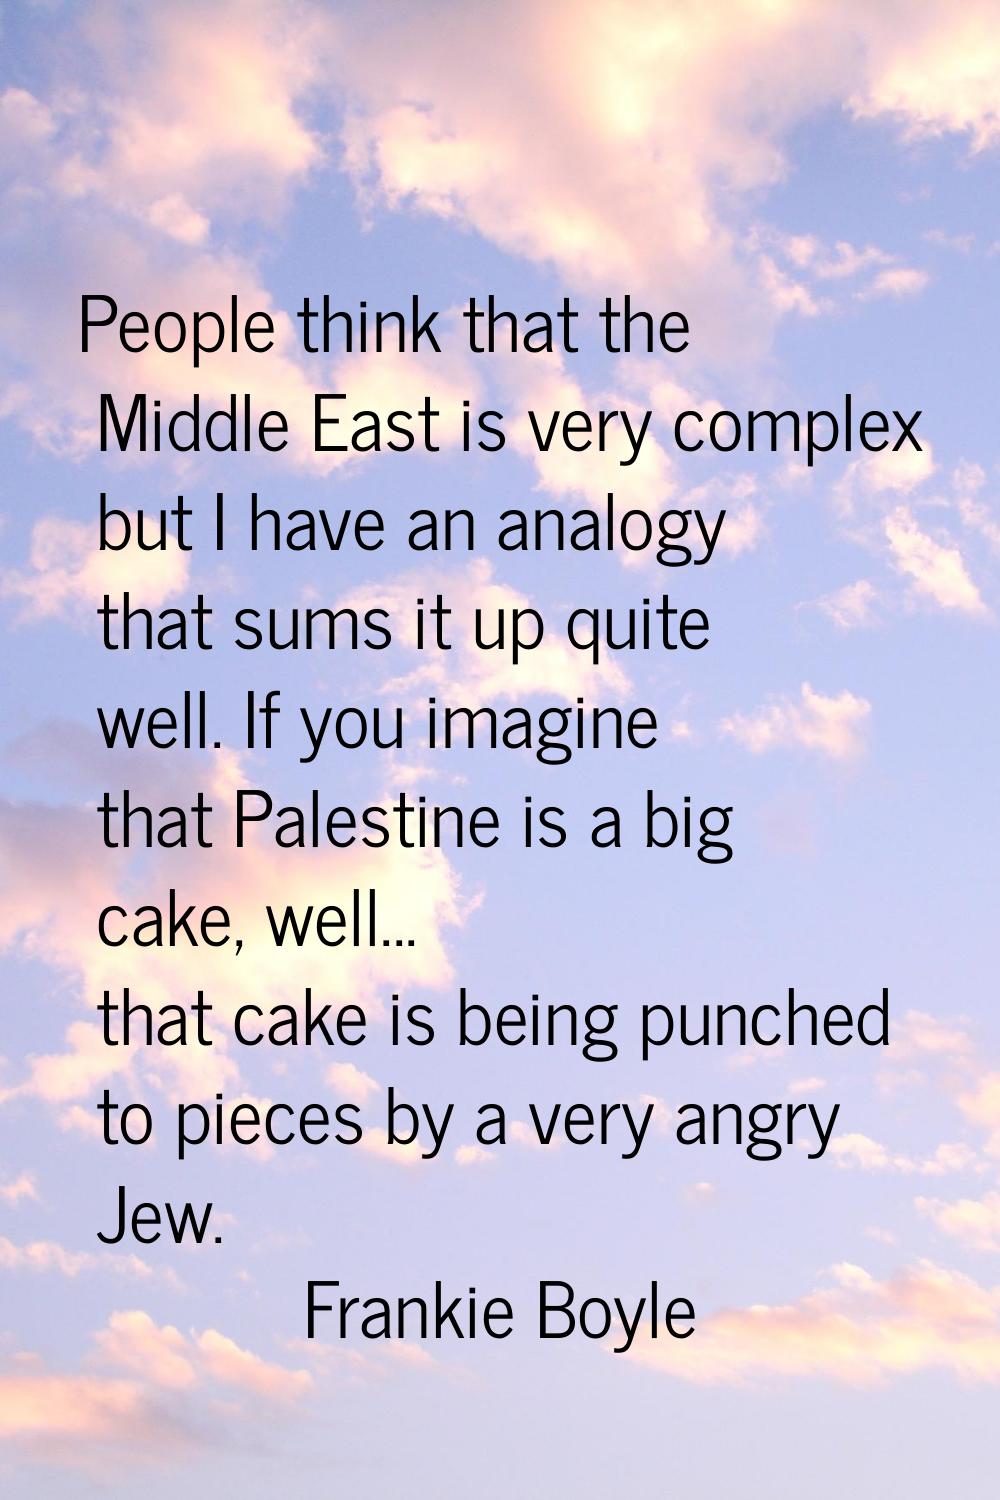 People think that the Middle East is very complex but I have an analogy that sums it up quite well.